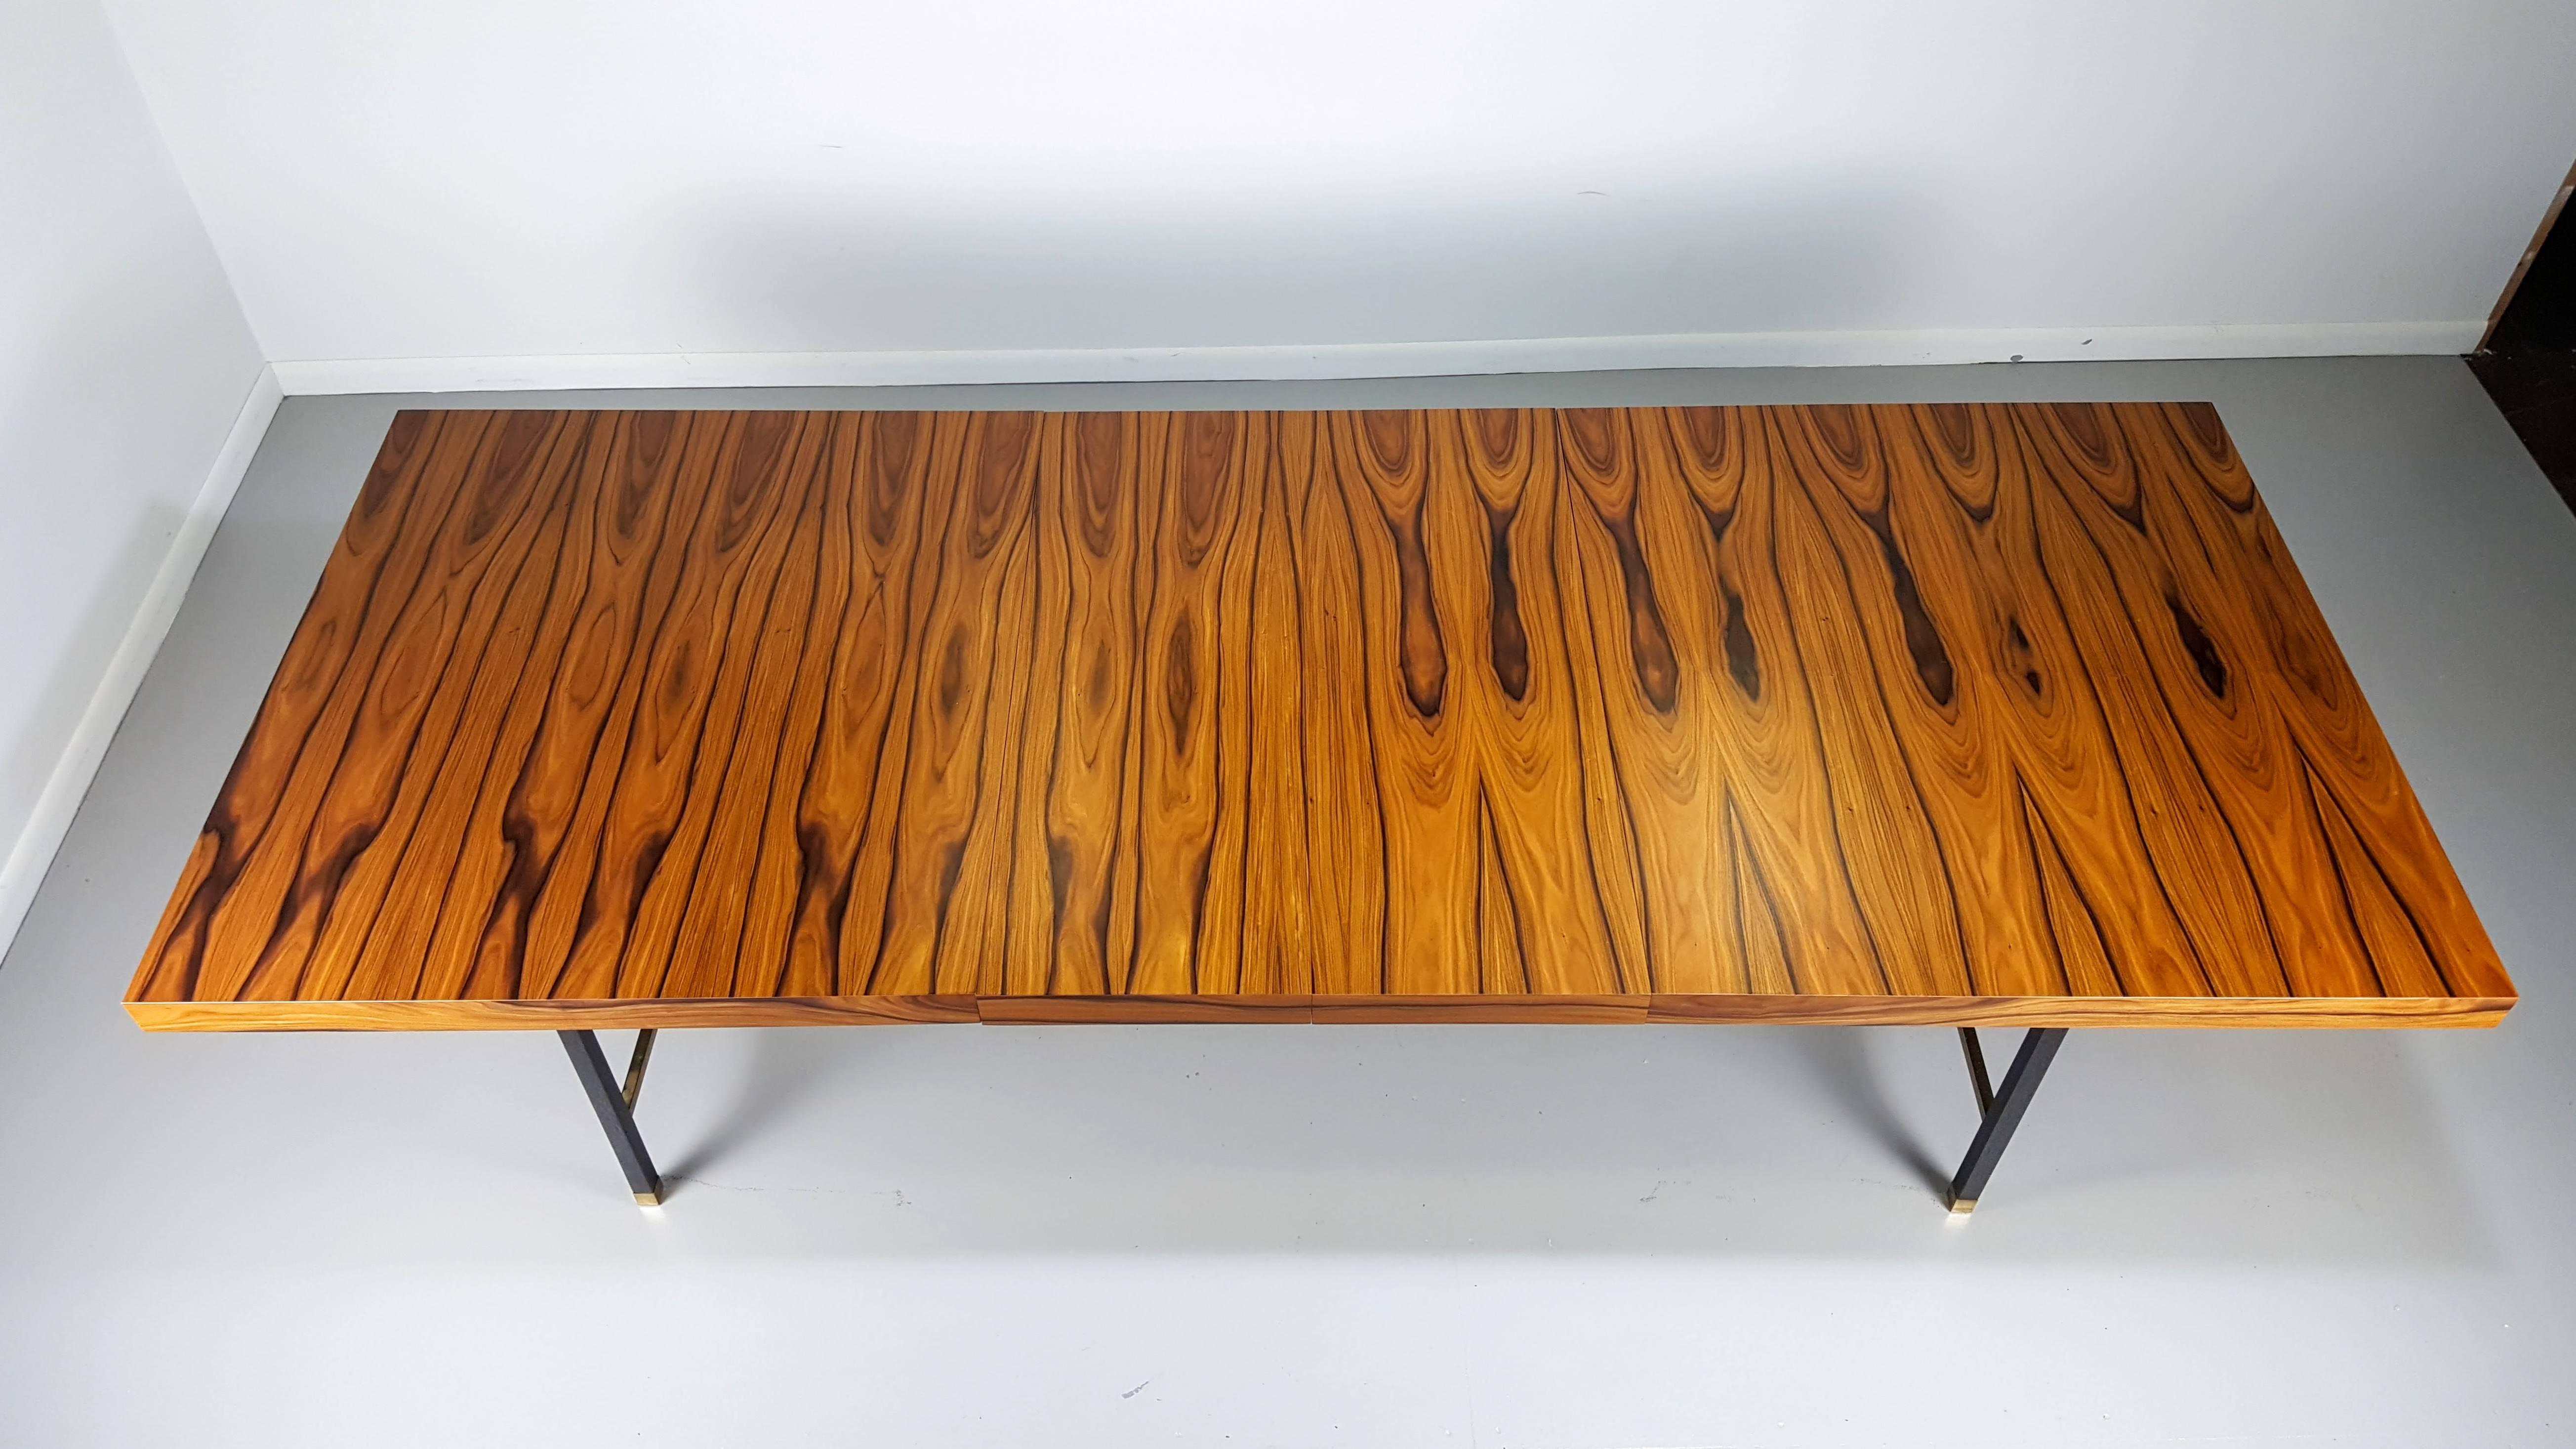 Breathtaking rosewood dining table with brass stretchers by Harvey Probber Studio, 1965. This table is by far the best quality dining table we have had. Original mahogany veneer was replaced with an absolutely insane rosewood grain veneer. Brass is